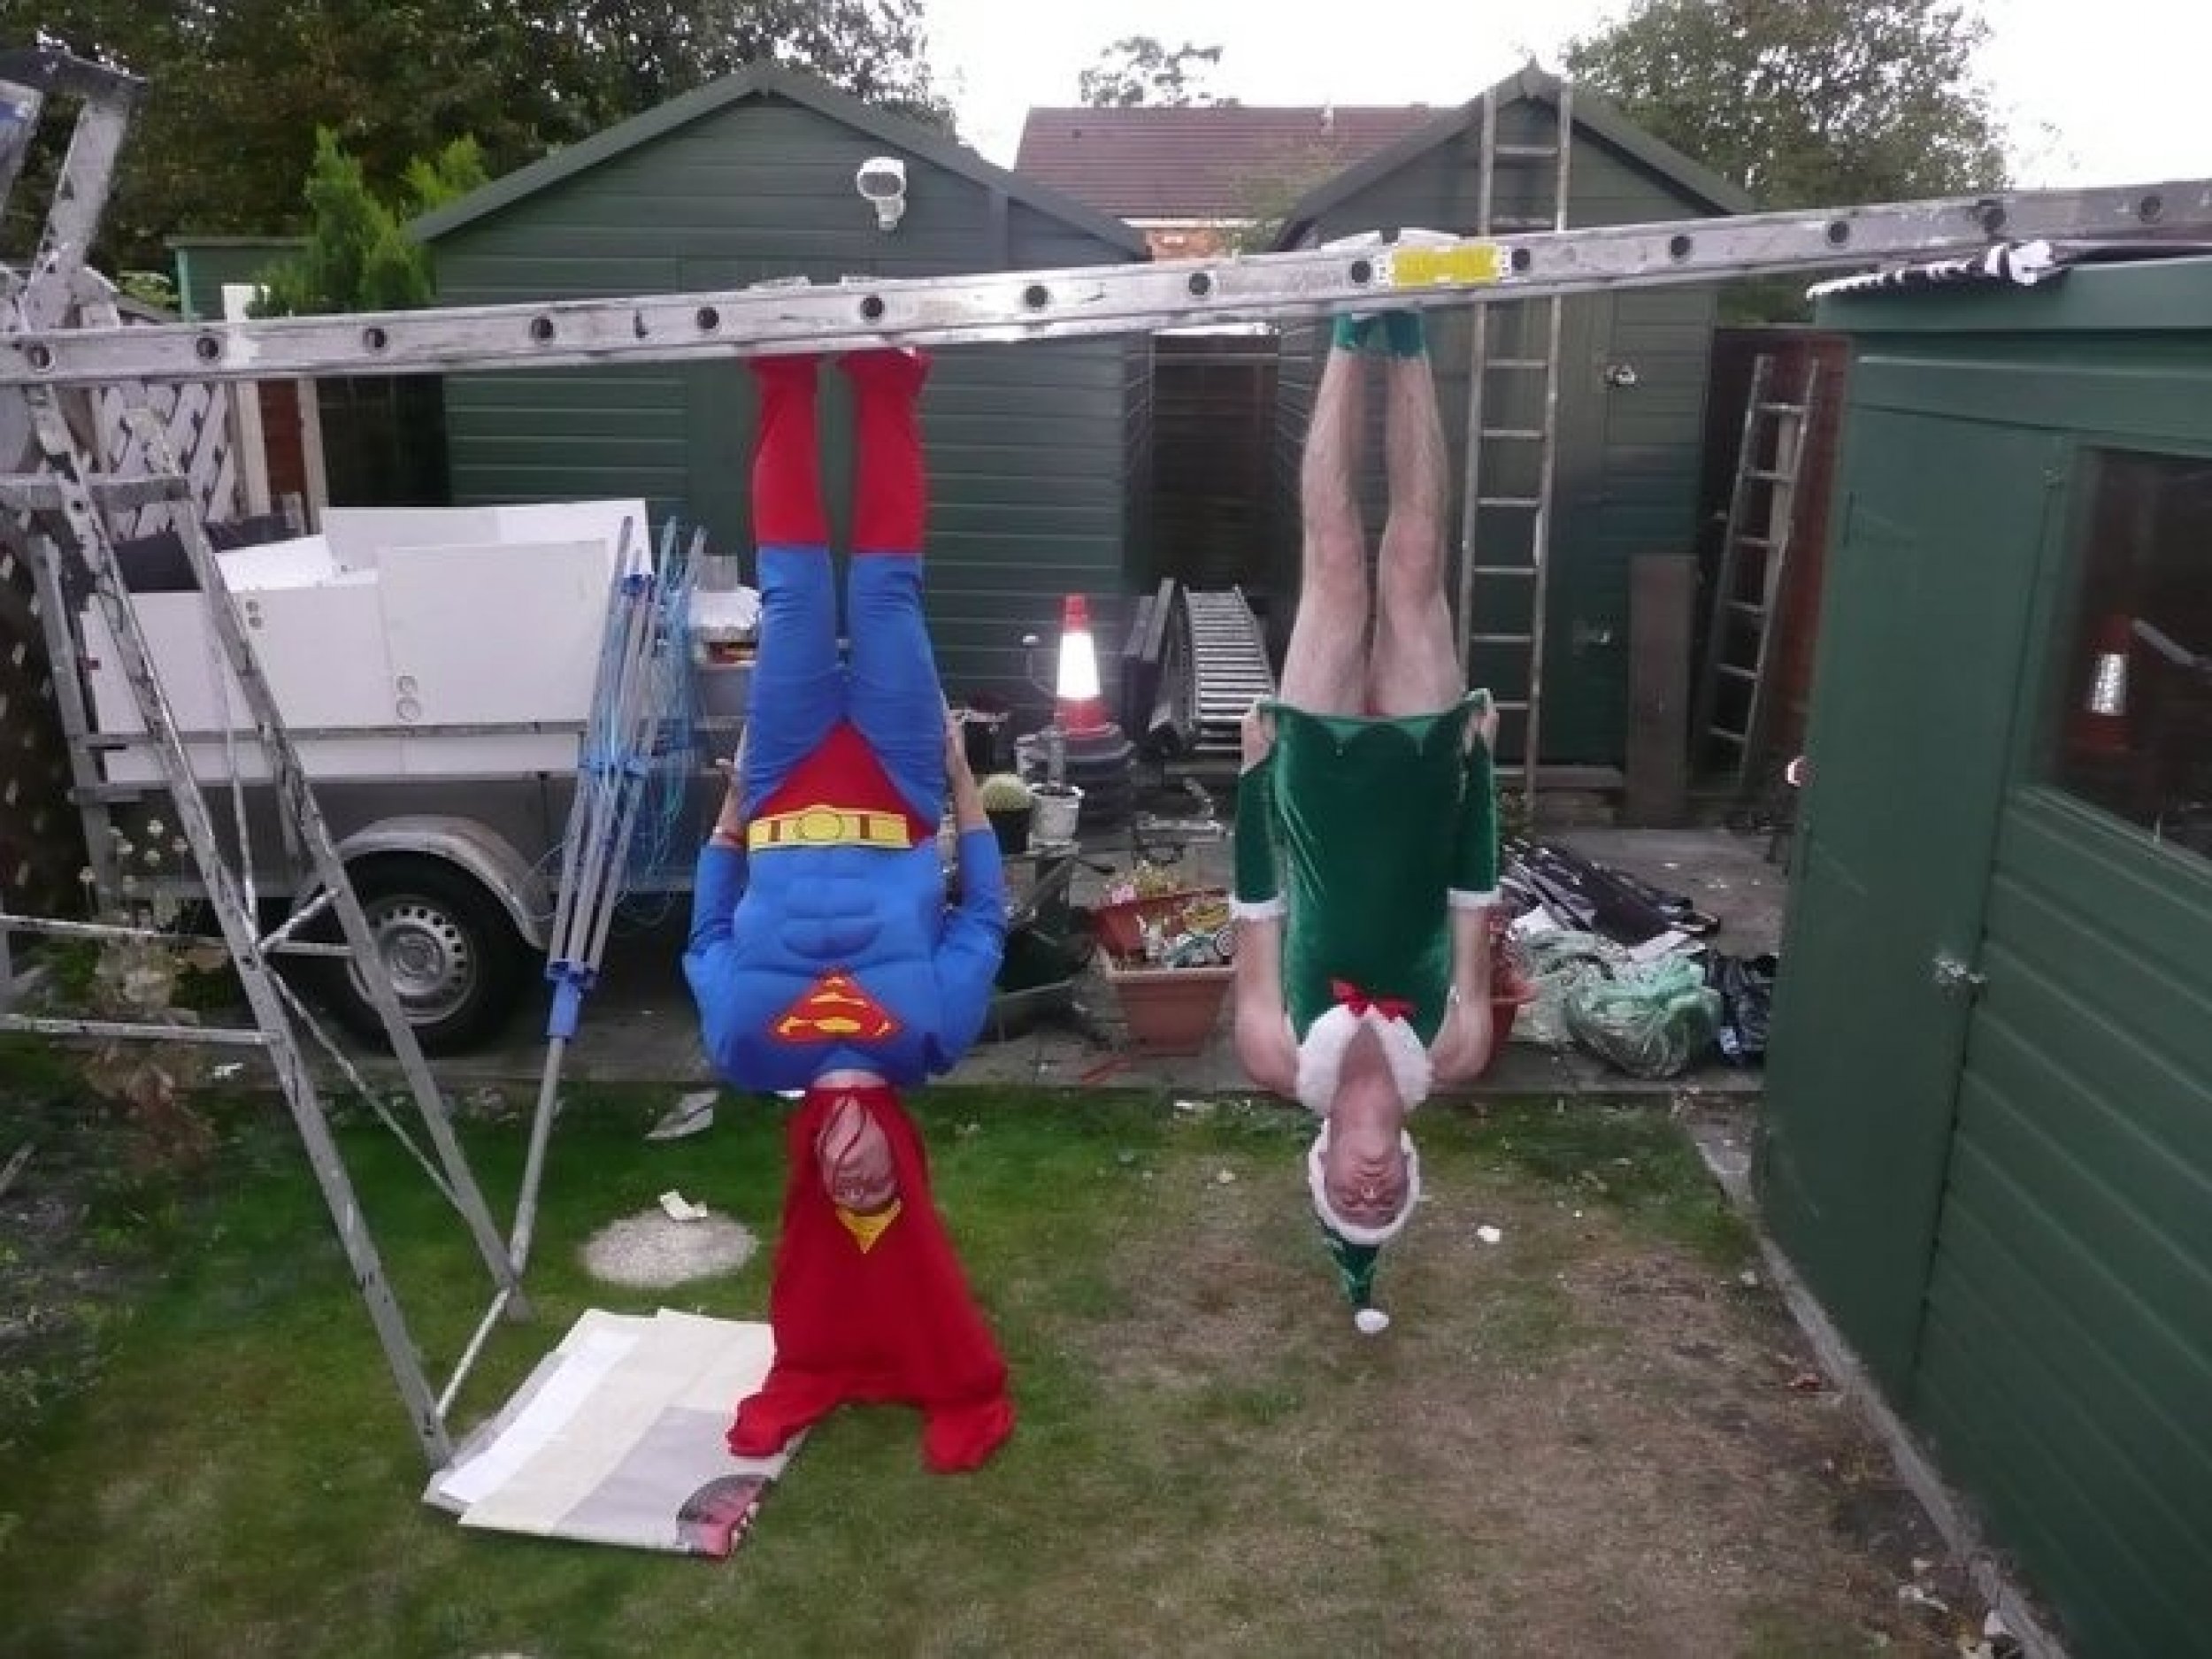 Planking, Owling, Horsemanning are Passe, Batmanning is Trendy Now